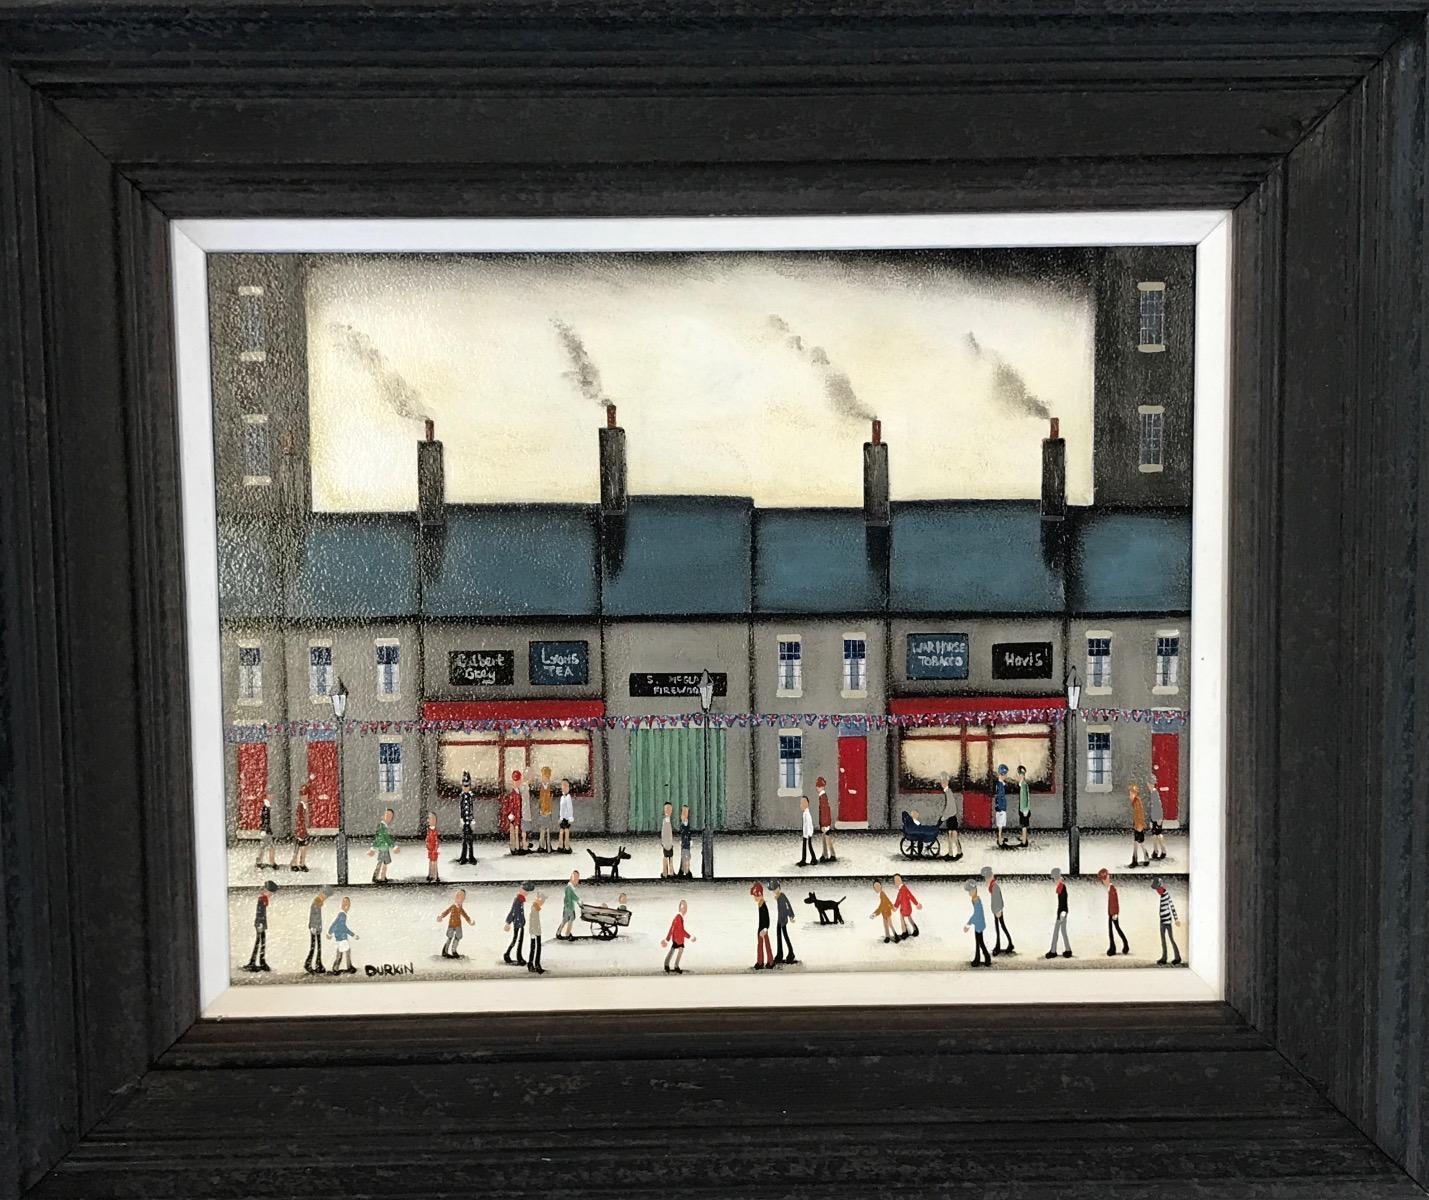 High Street Shopping III by Sean Durkin, is an original painitng on board. Sean paints a high street full of people walking, running and talking on a gloomy day.

ADDTIONAL INFORMATION:
Original Painting by Sean Durkin
Oil on Board
Complete size of